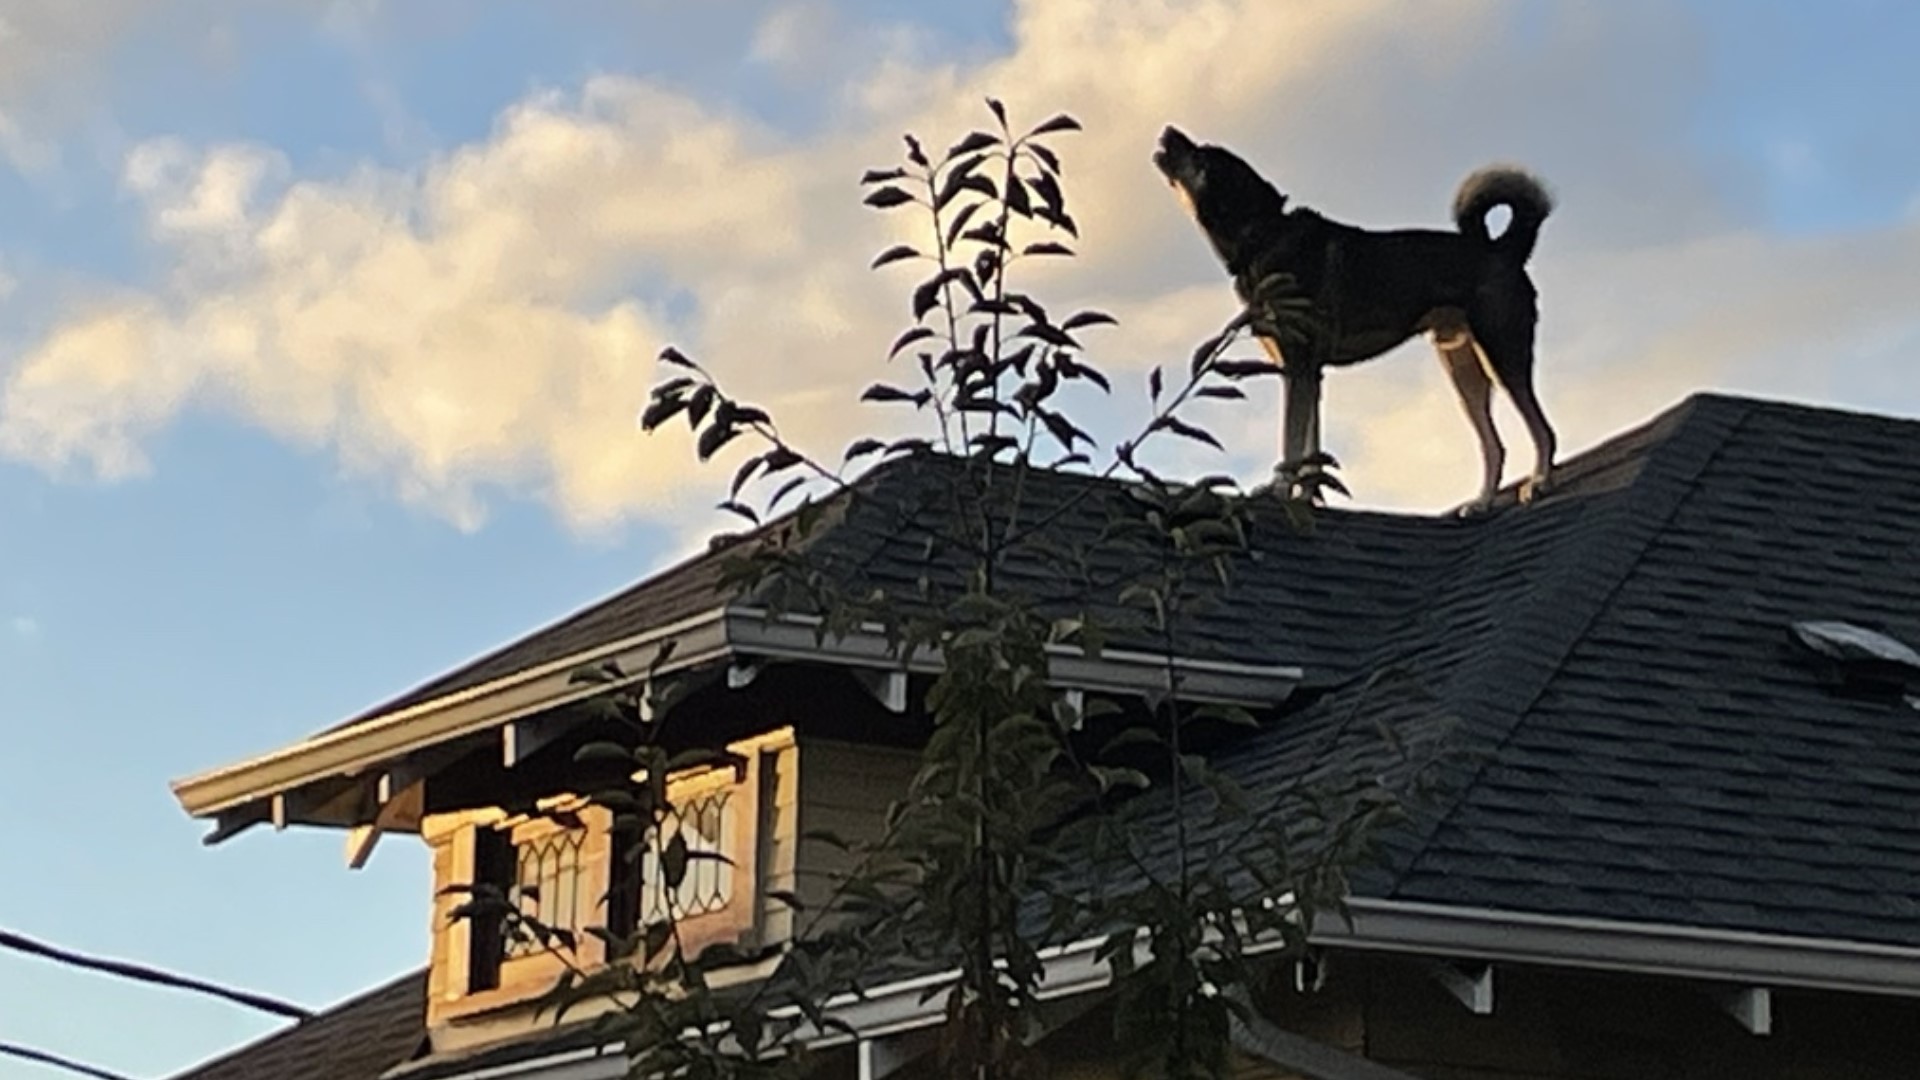 Rumple keeps a close eye on the neighborhood from the comfort of his roof. #k5evening